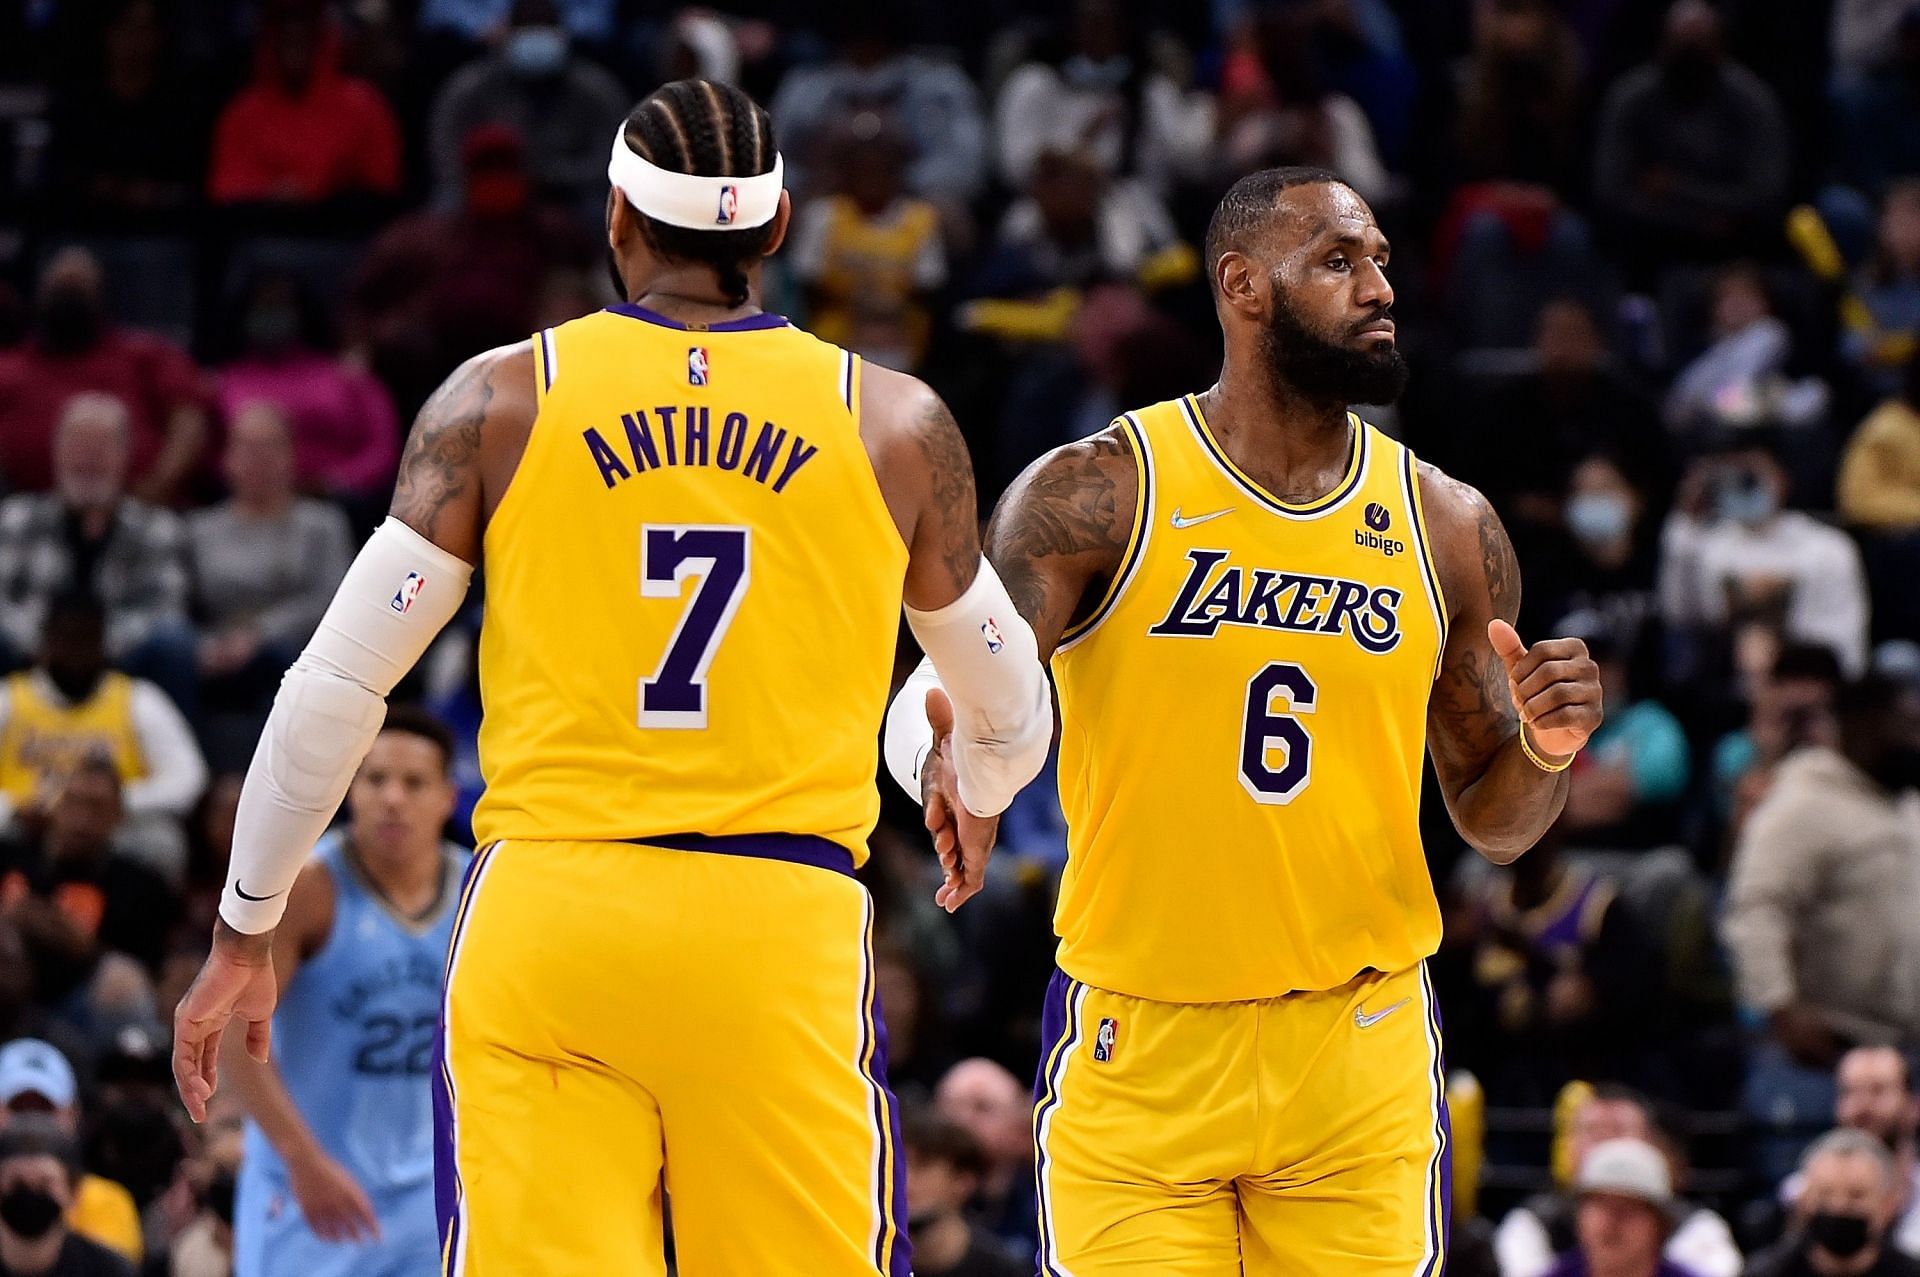 The LA Lakers were without LeBron James in their loss to the Philadelphia 76ers on Thursday